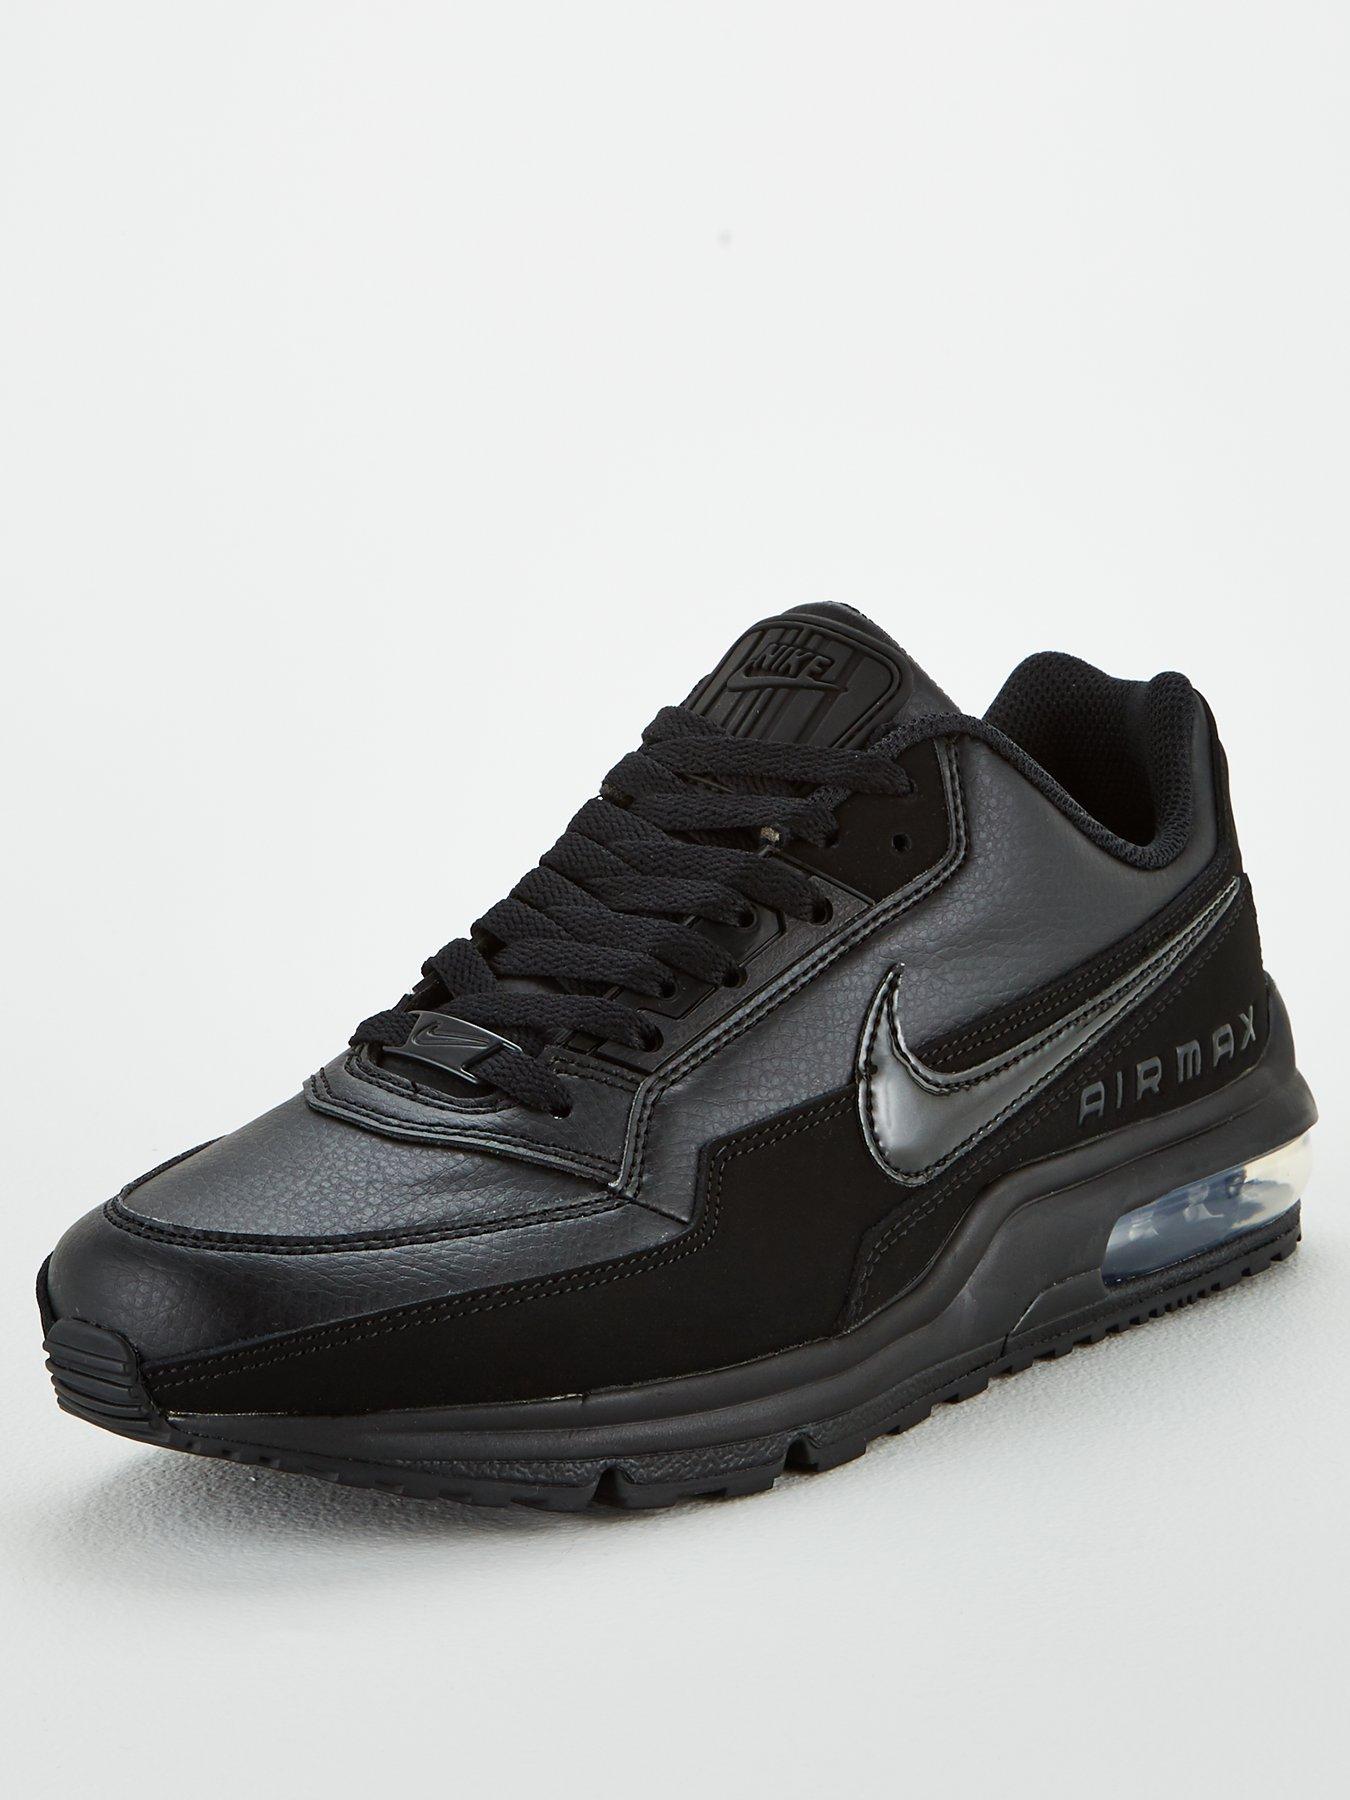 Mens Nike Trainers | Air | Littlewoods.com